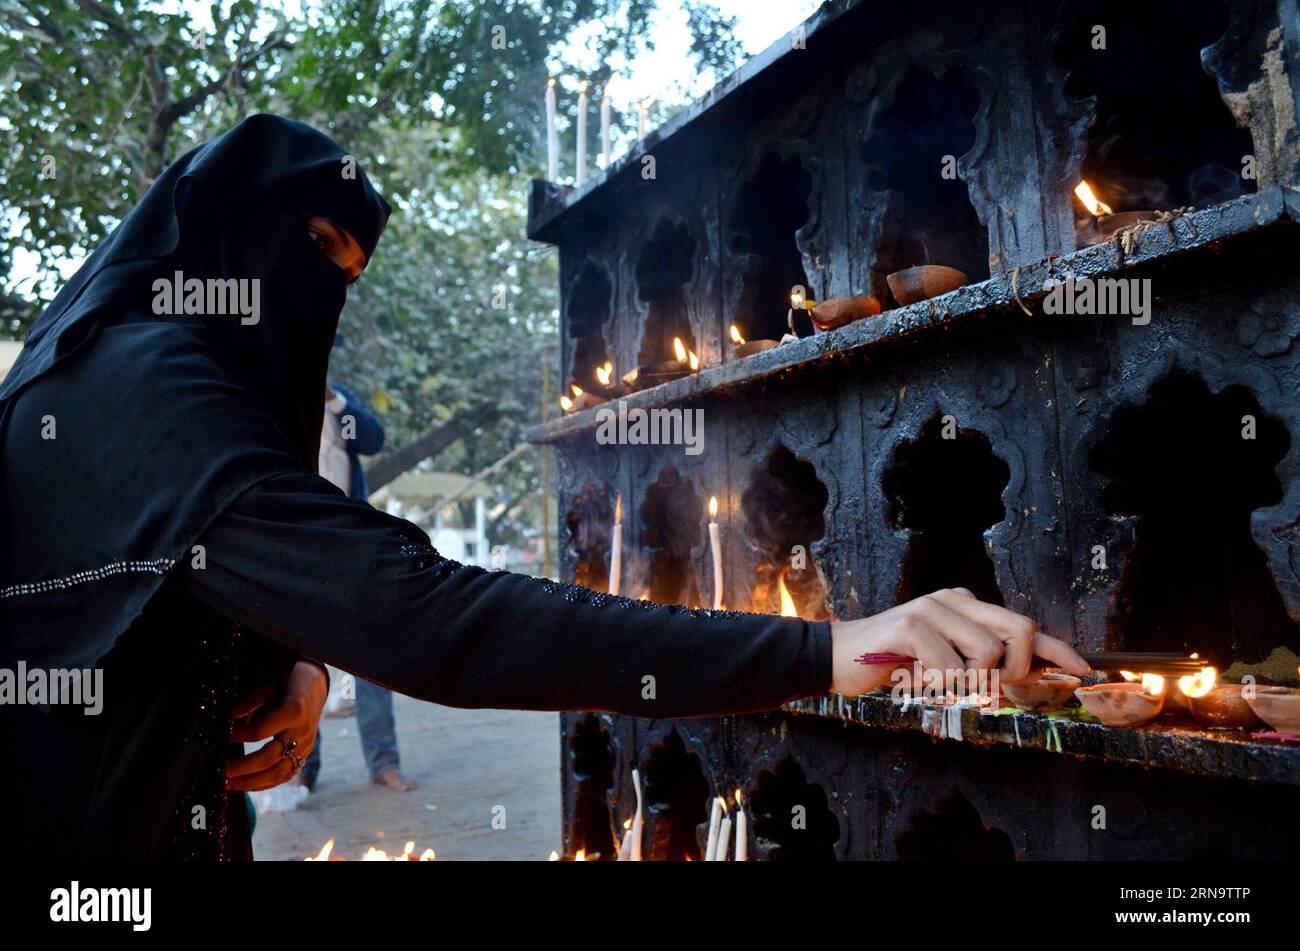 (151220) -- LAHORE, Dec. 19, 2015 -- A Muslim devotee lights candles and oil lamps at the shrine of the Sufi saint Mian Mir Sahib during a festival to mark the saint s death anniversary in eastern Pakistan s Lahore, Dec. 19, 2015. Hundreds of devotees are attending the two-day festival. ) PAKISTAN-LAHORE-RELIGIOUS FESTIVAL JamilxAhmed PUBLICATIONxNOTxINxCHN   151220 Lahore DEC 19 2015 a Muslim devotee Lights Candles and Oil lamps AT The Shrine of The Sufi Saint Mian me Sahib during a Festival to Mark The Saint S Death Anniversary in Eastern Pakistan S Lahore DEC 19 2015 hundreds of devotees ar Stock Photo